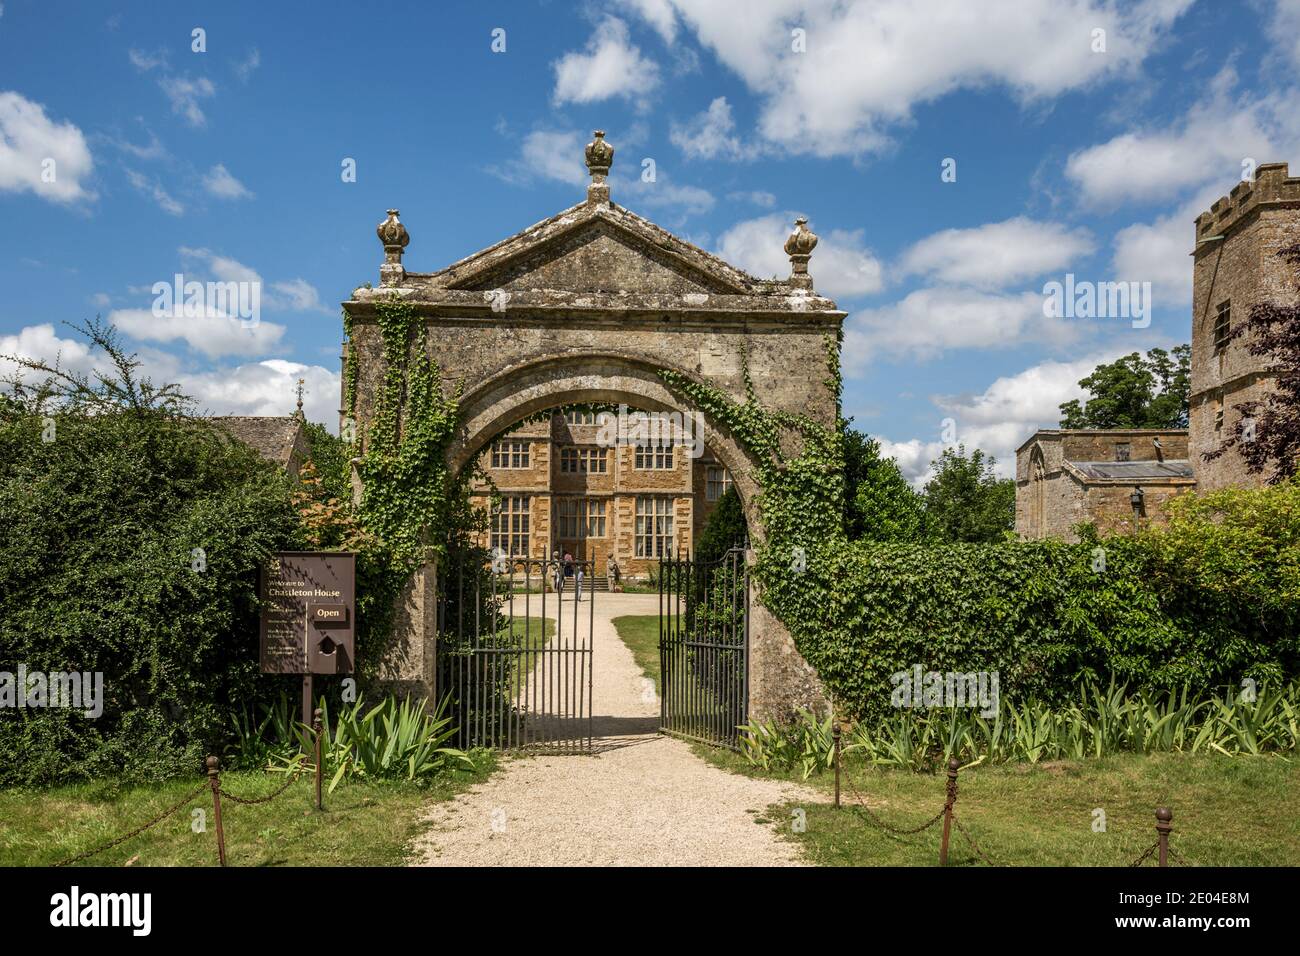 Chastleton House is a Jacobean country house situated at Chastleton near Moreton-in-Marsh, Oxfordshire. Stock Photo